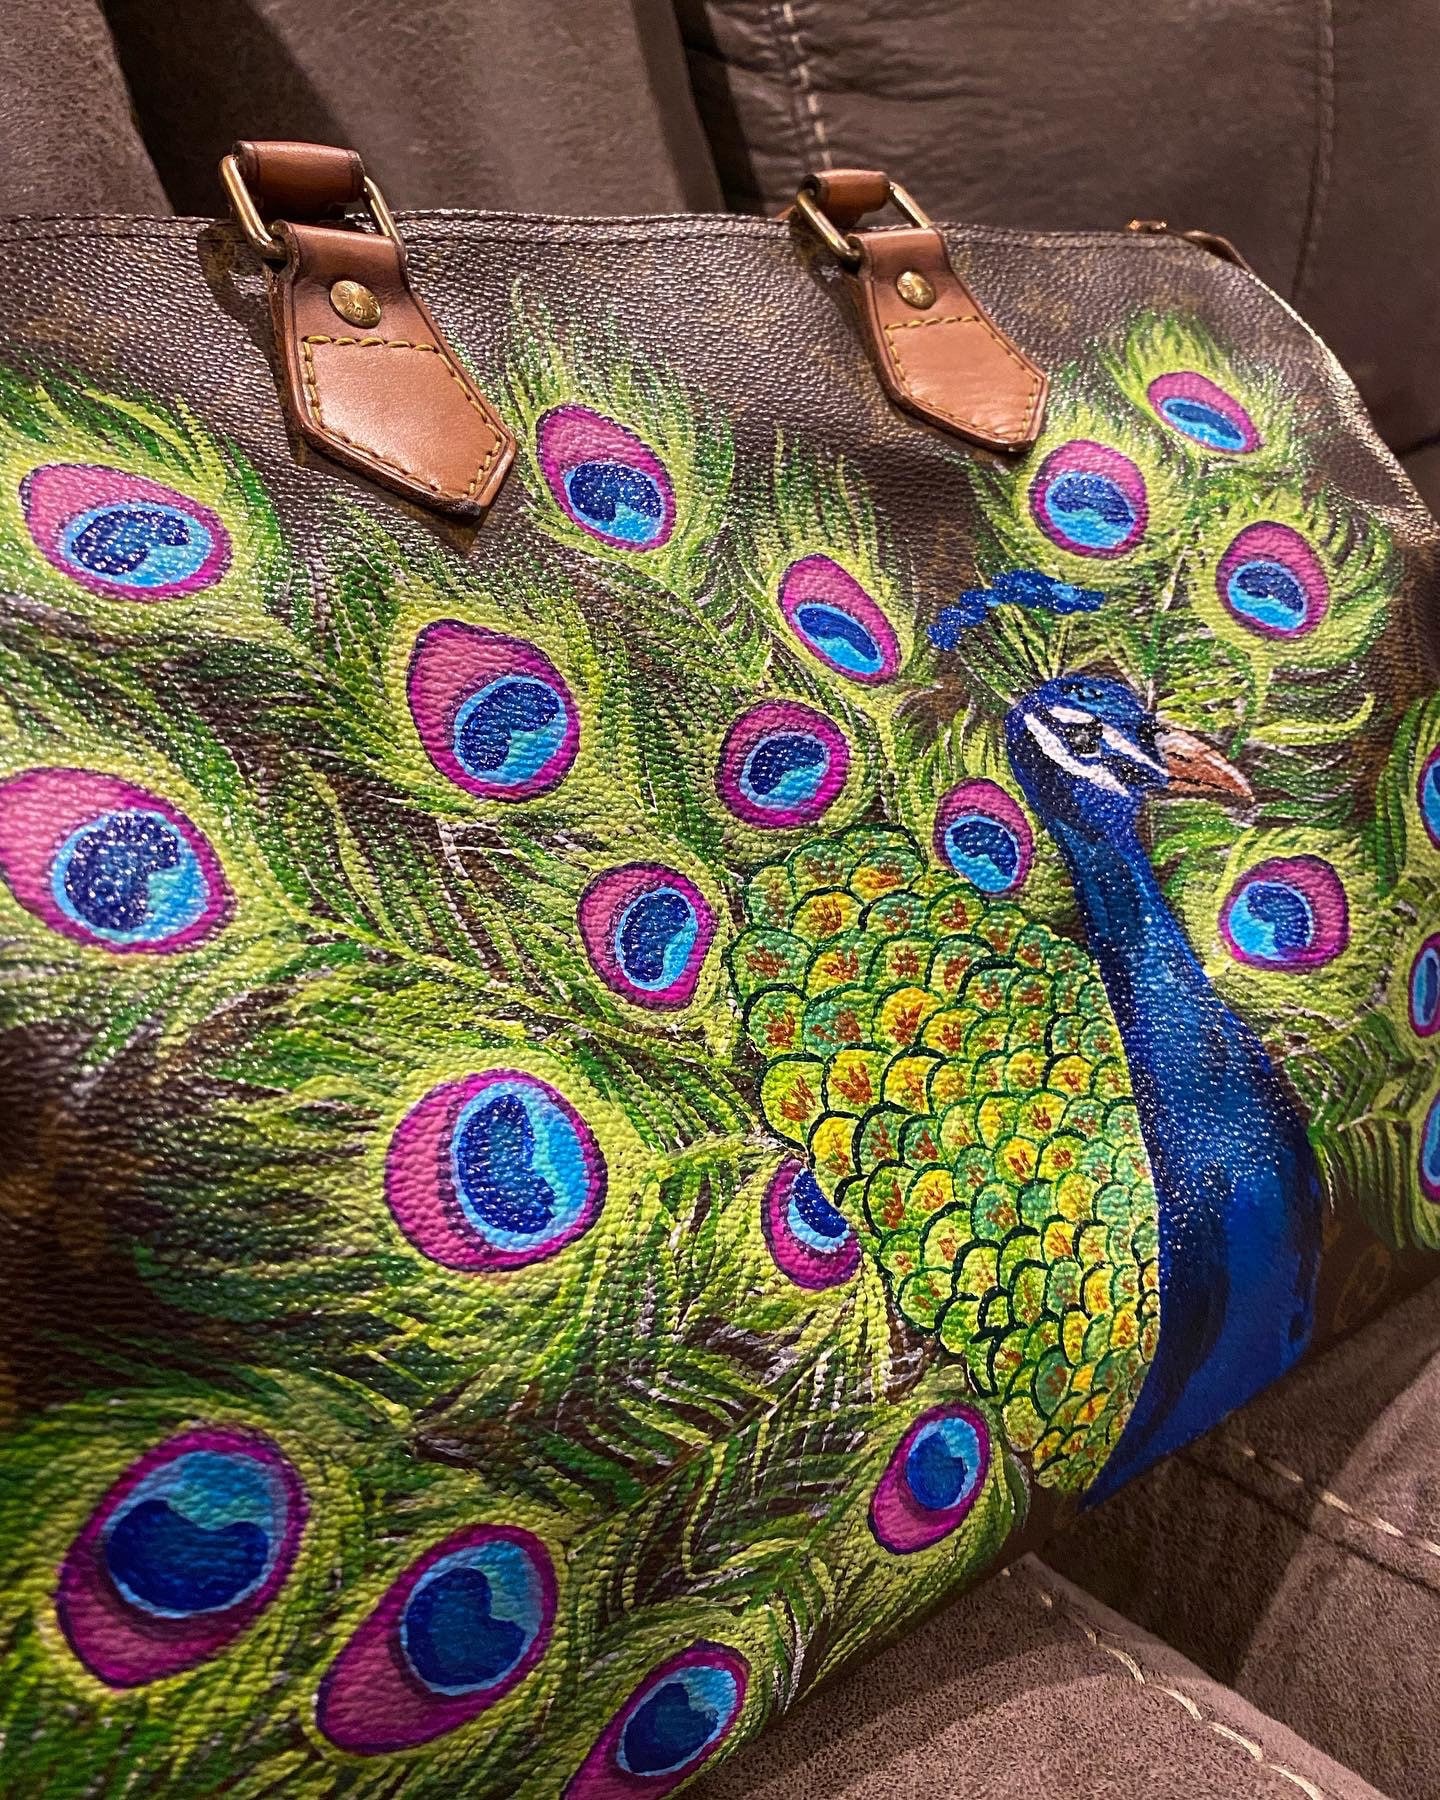 This Designer Makes Purses and Other Accessories Into Art With Hand-Painted  Details